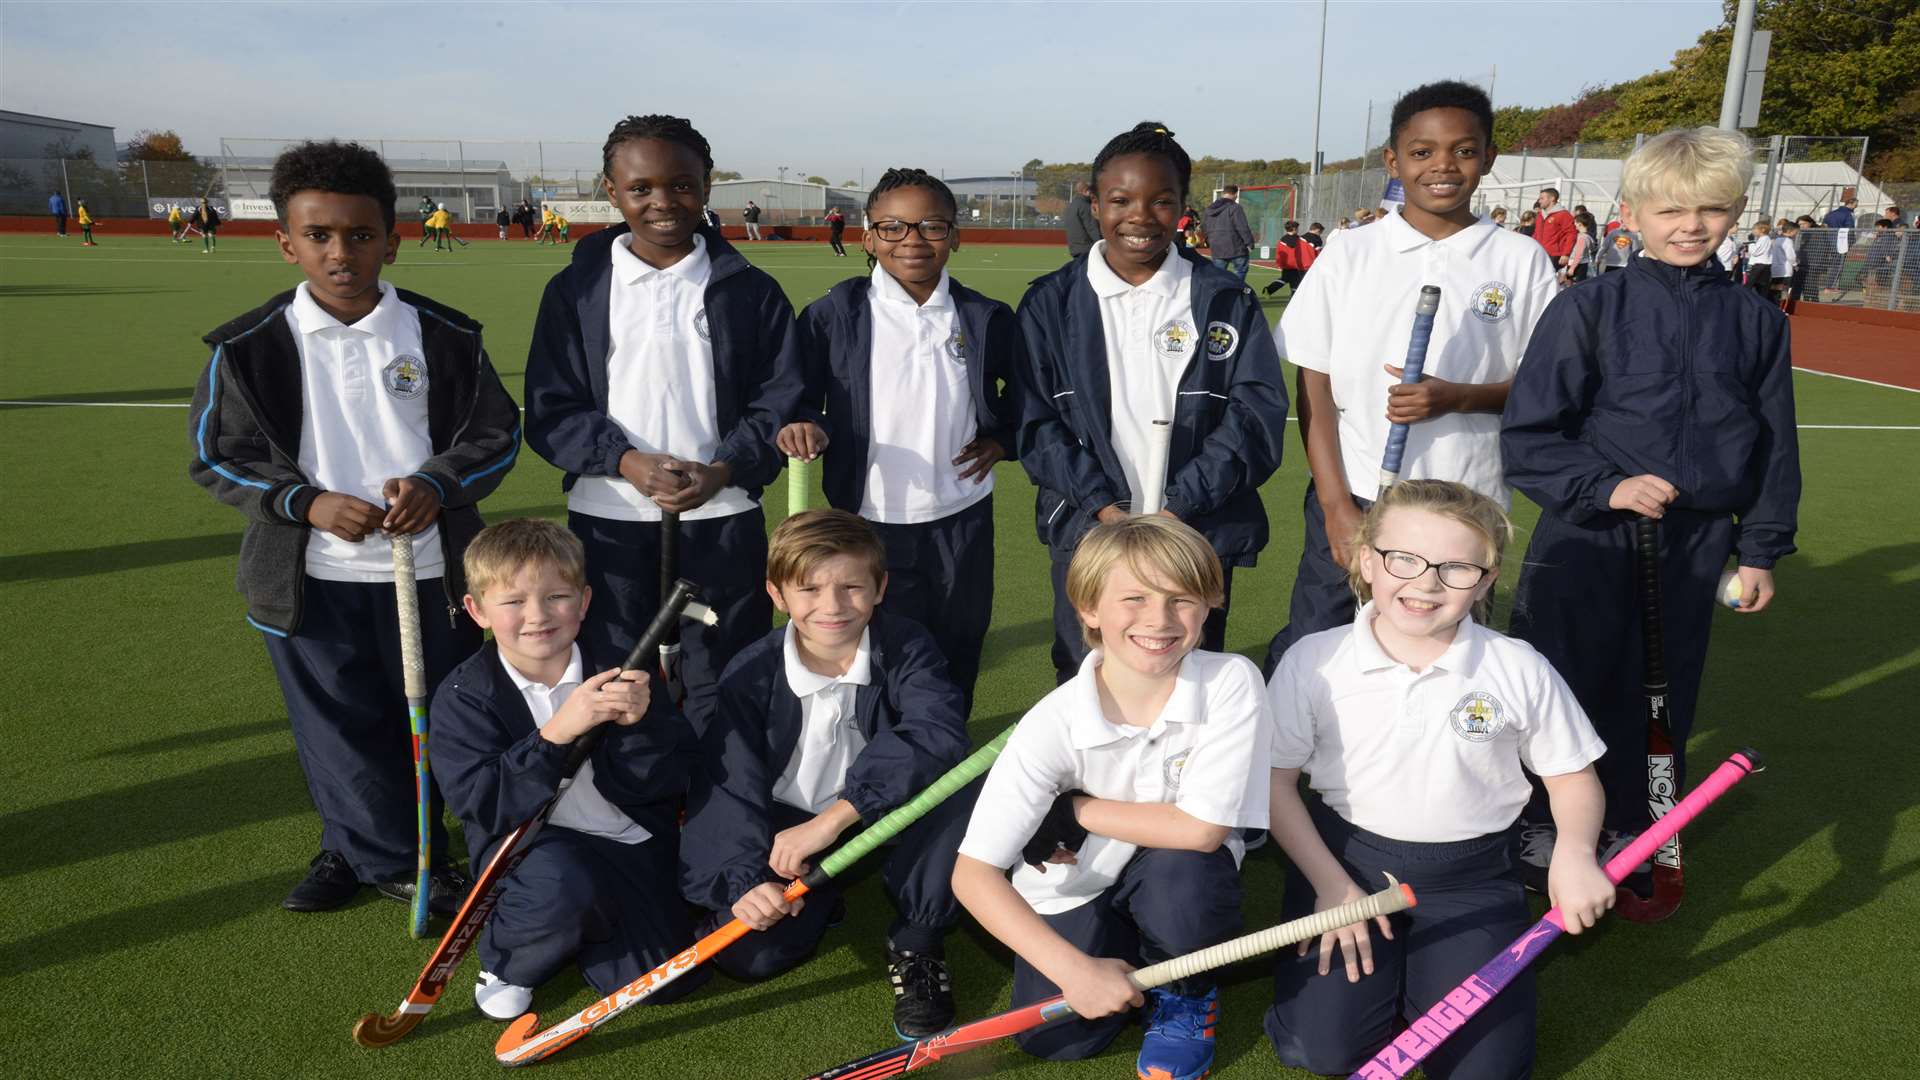 The All Saints team at the Medway Mini Youth Games hockey tournament